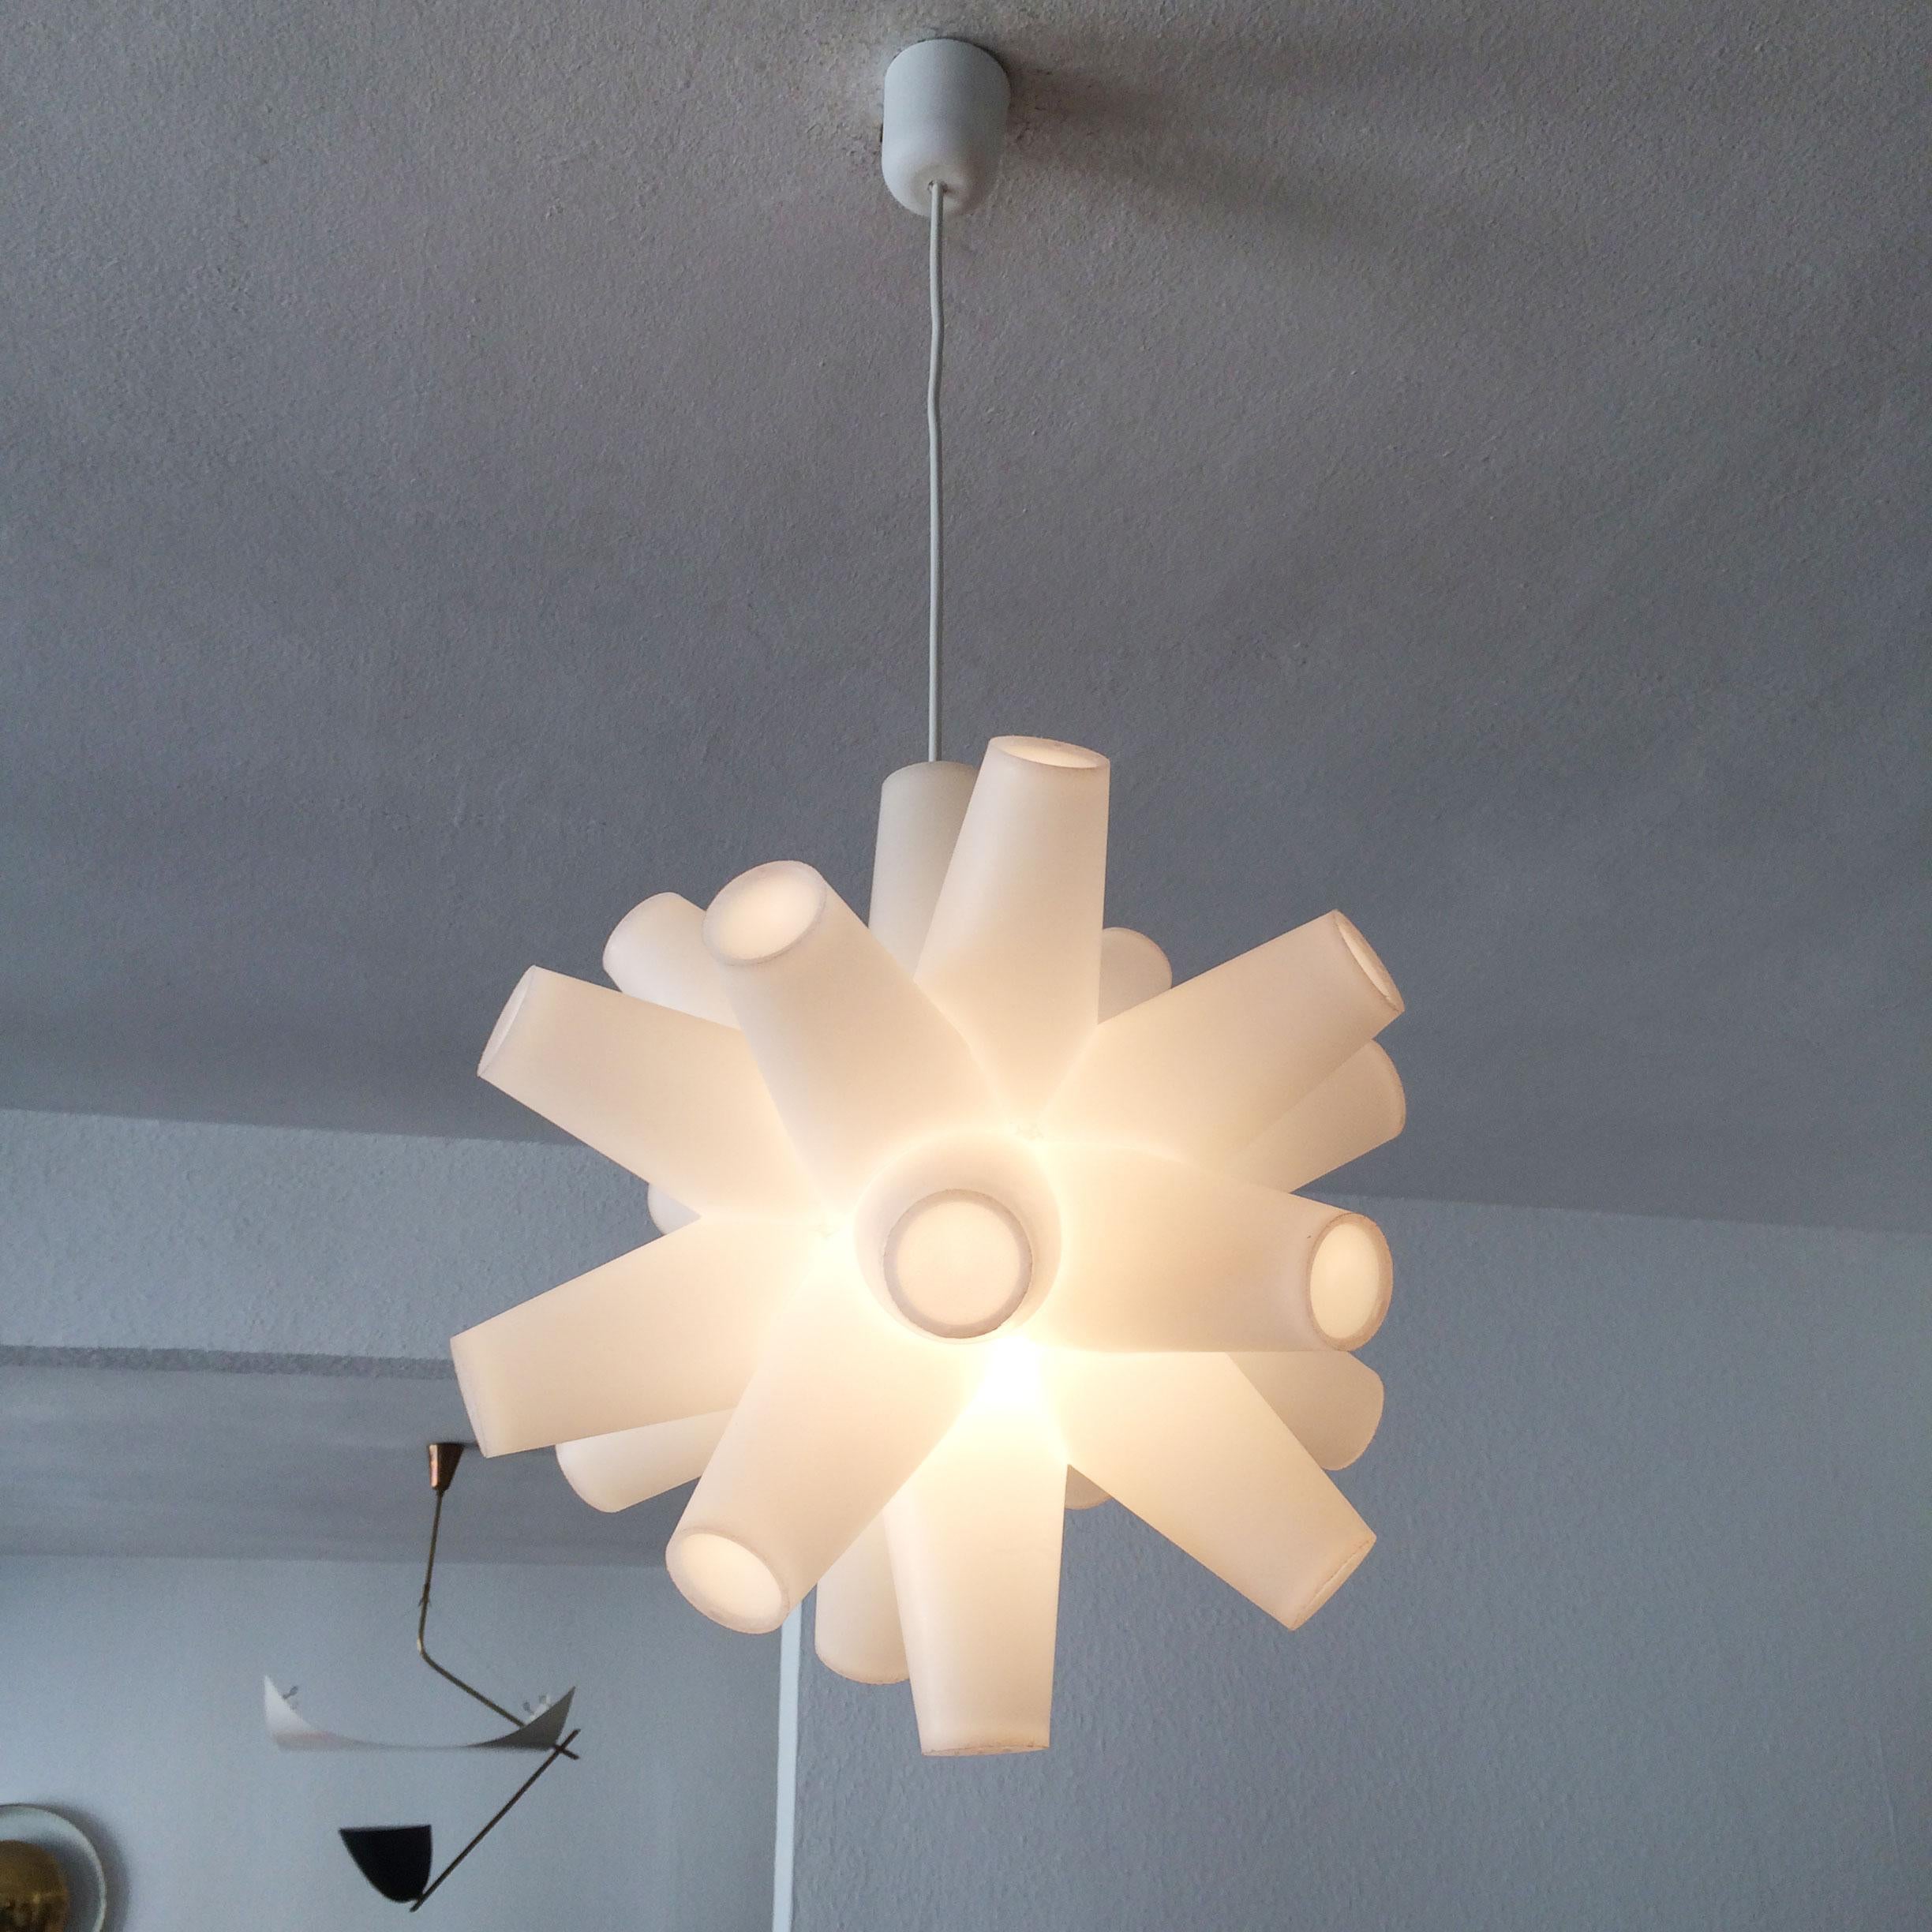 A gorgeous sputnik star lamp. Designed by Tom Dixon in 1977 for Eurolounge, Great Britain. This lamp is multi functional, can be used as pendant, table or floor lamp.

The lamp is executed in rotationally molded polyethylene and has 11 x E14